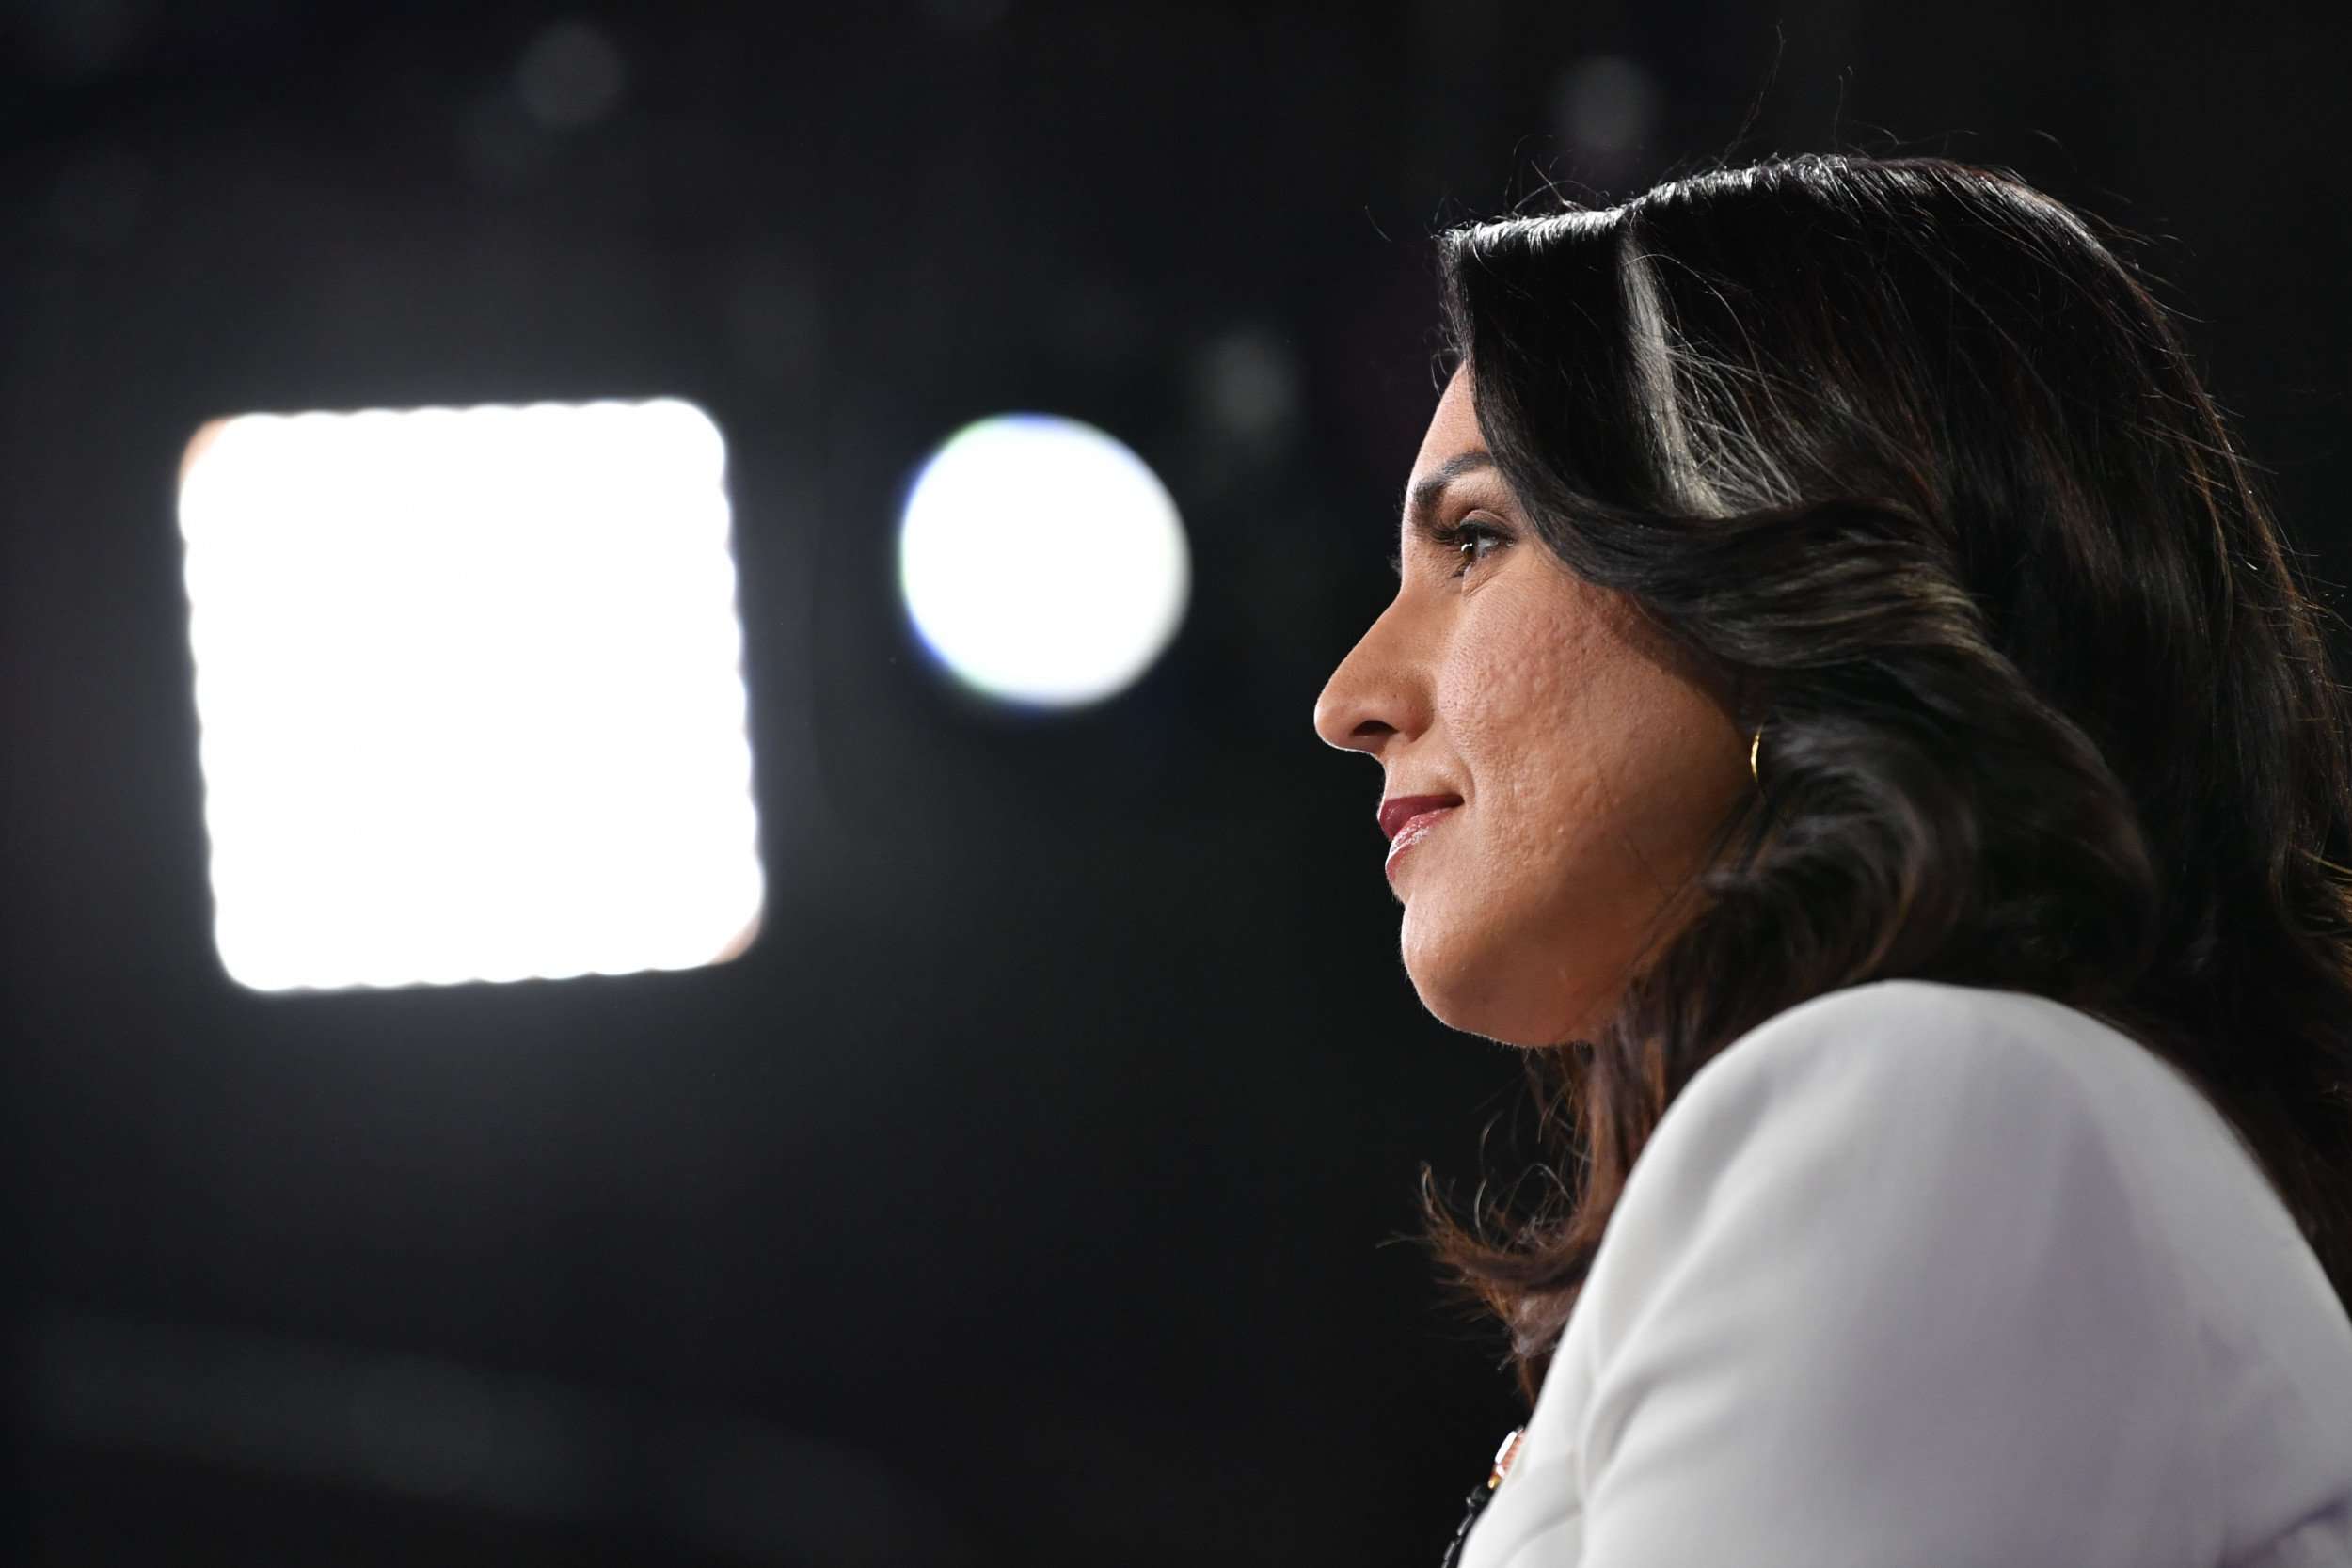 image for Tulsi Gabbard Becomes Most Disliked Democratic Primary Candidate After Voting 'Present' on Trump's Impeachment, Poll Shows